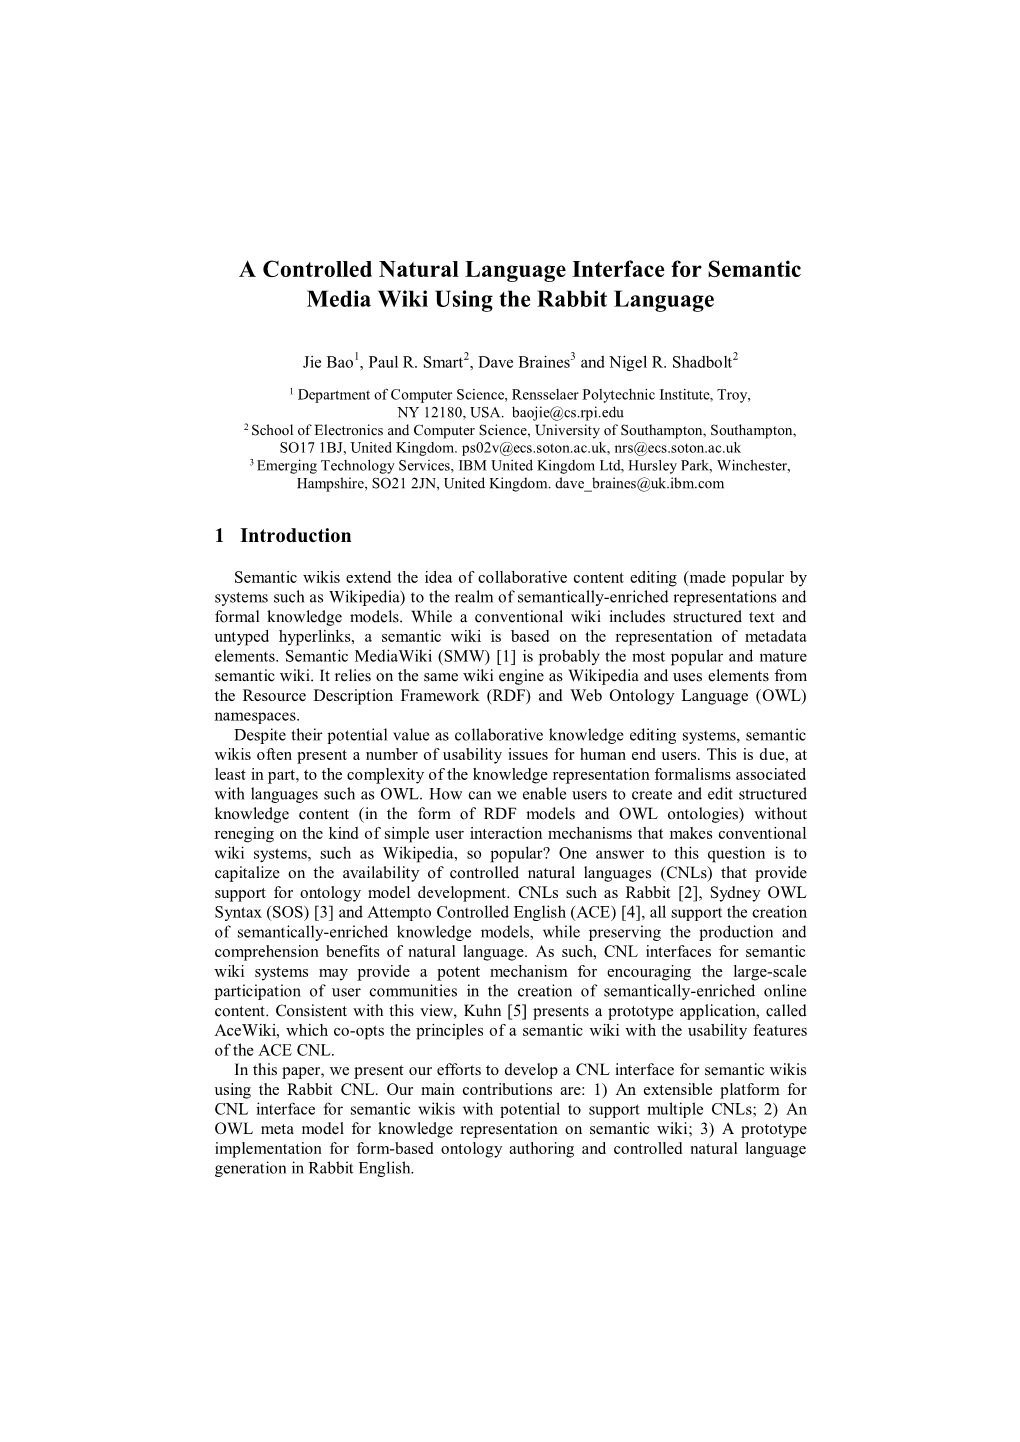 A Controlled Natural Language Interface for Semantic Media Wiki Using the Rabbit Language